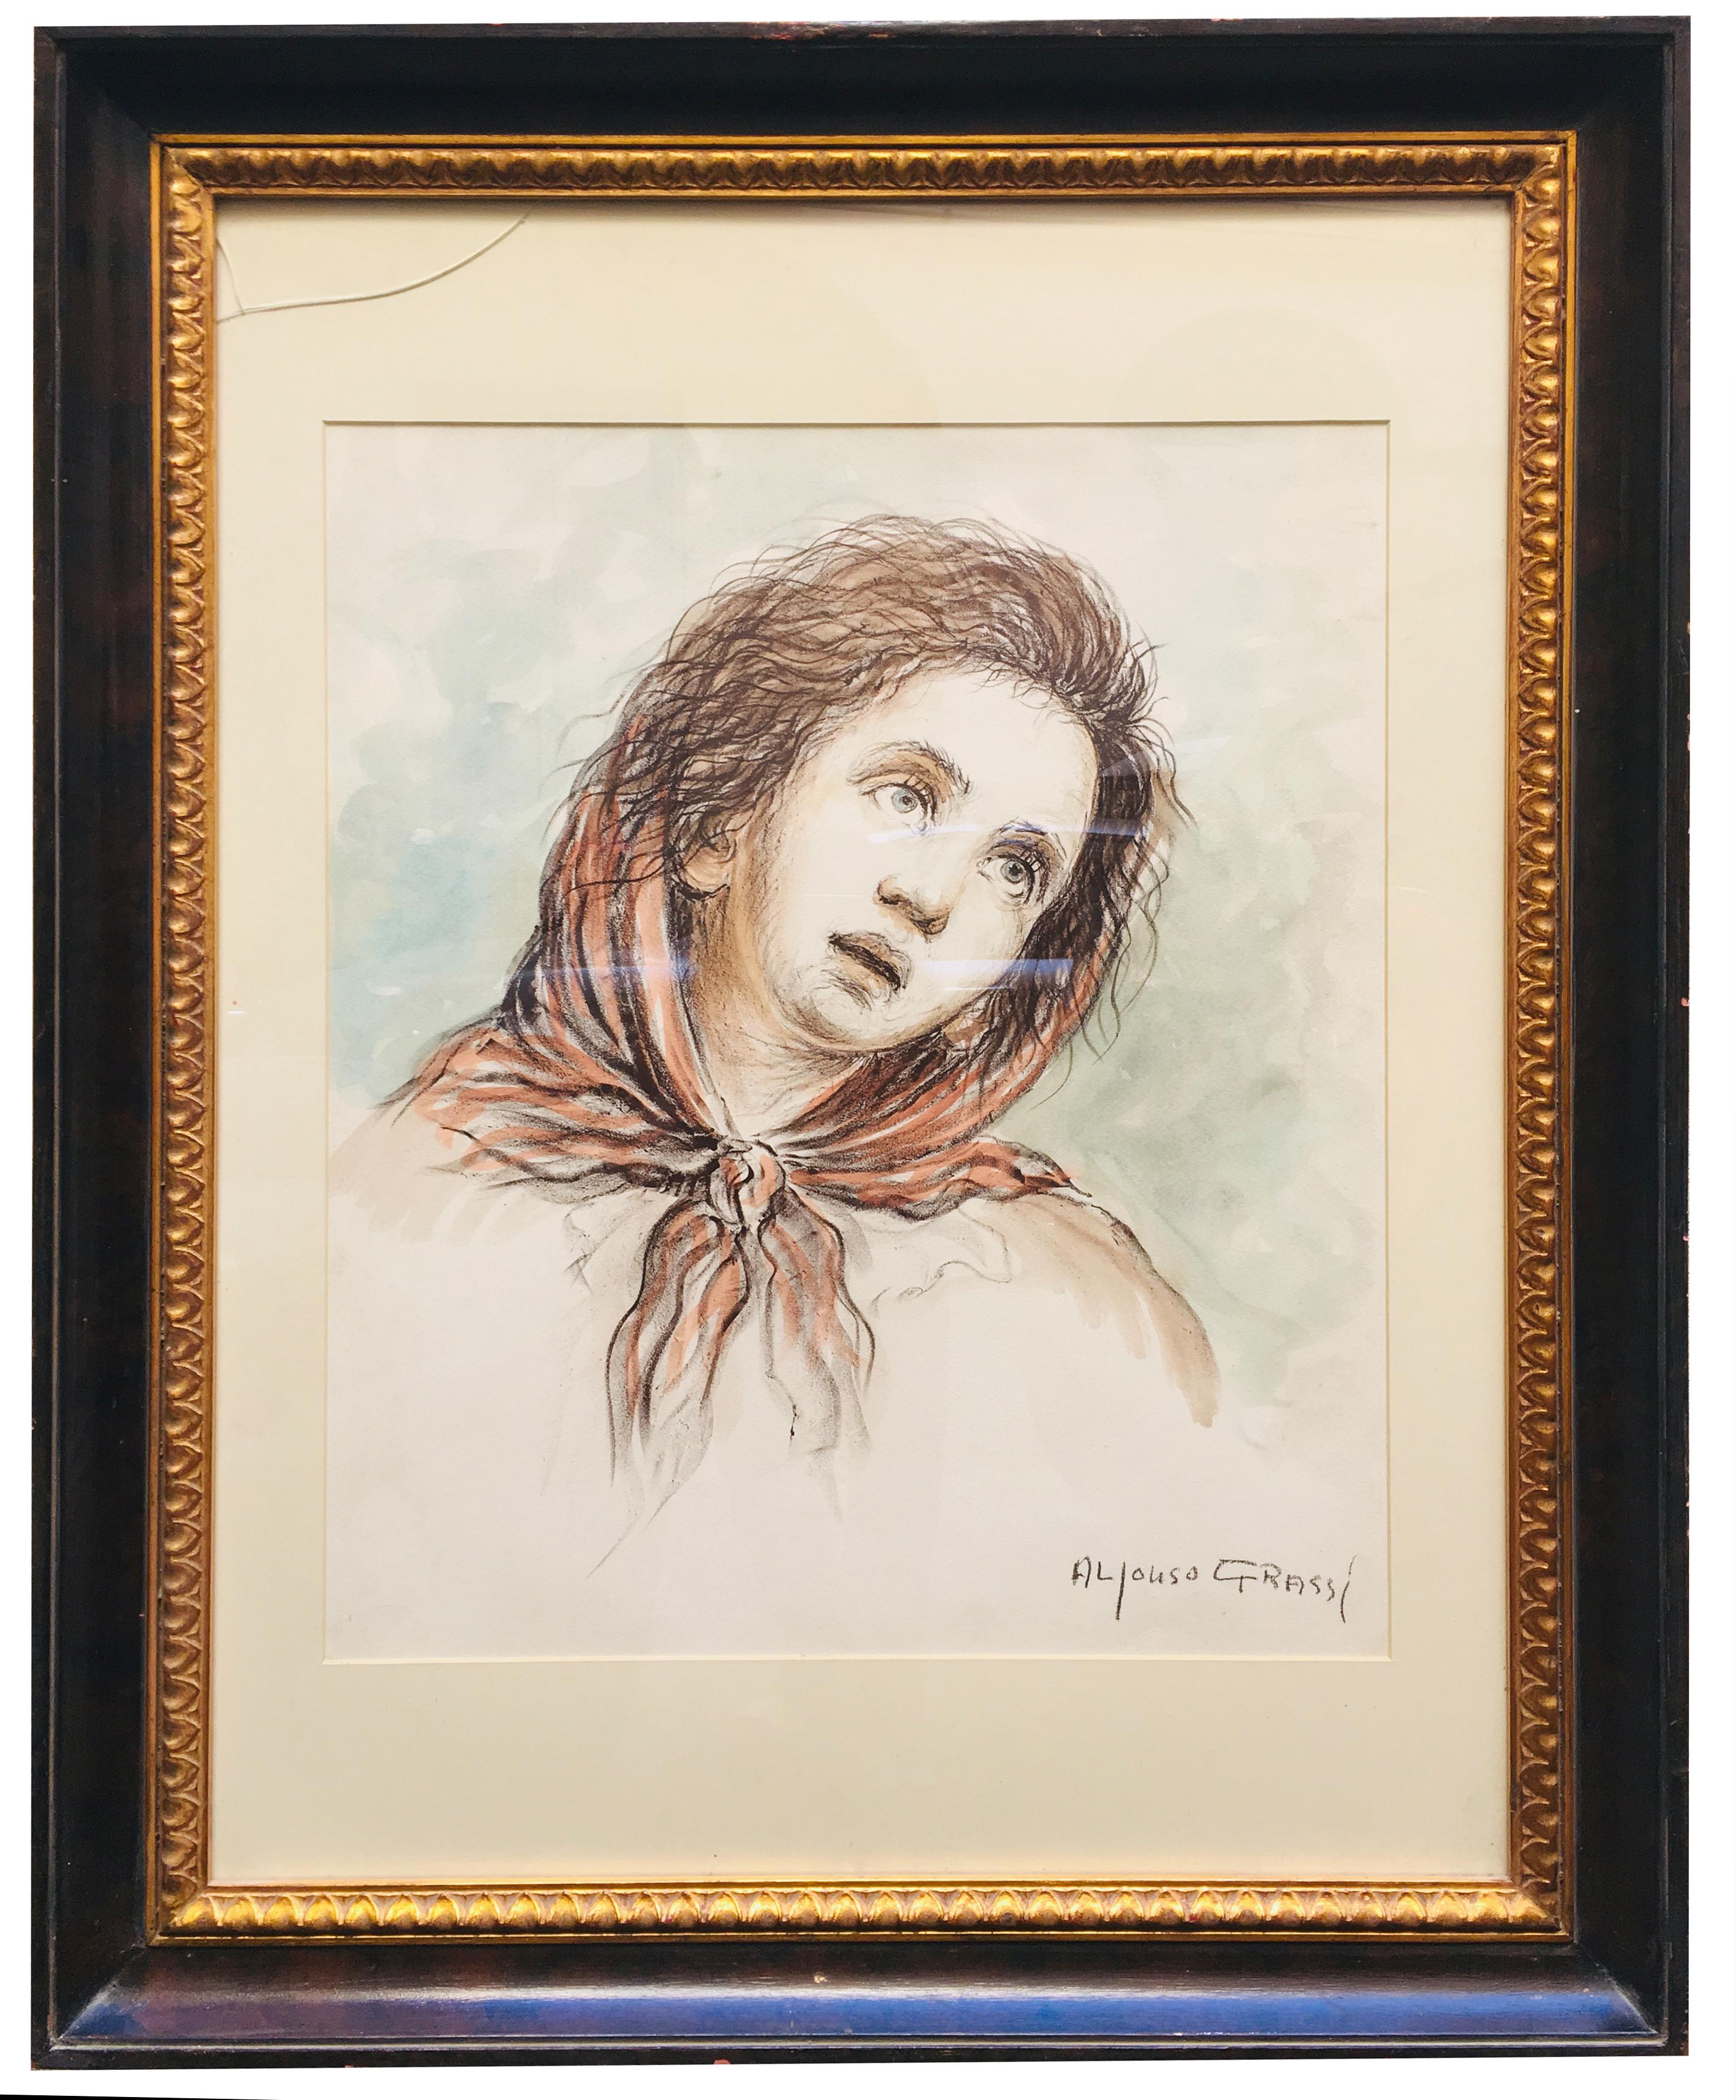 CHILD - Pastel on paper cm.51x41  signed lower right by Alfonso Grassi, Italy.  
Wooden frame with passeportout cm.94x73